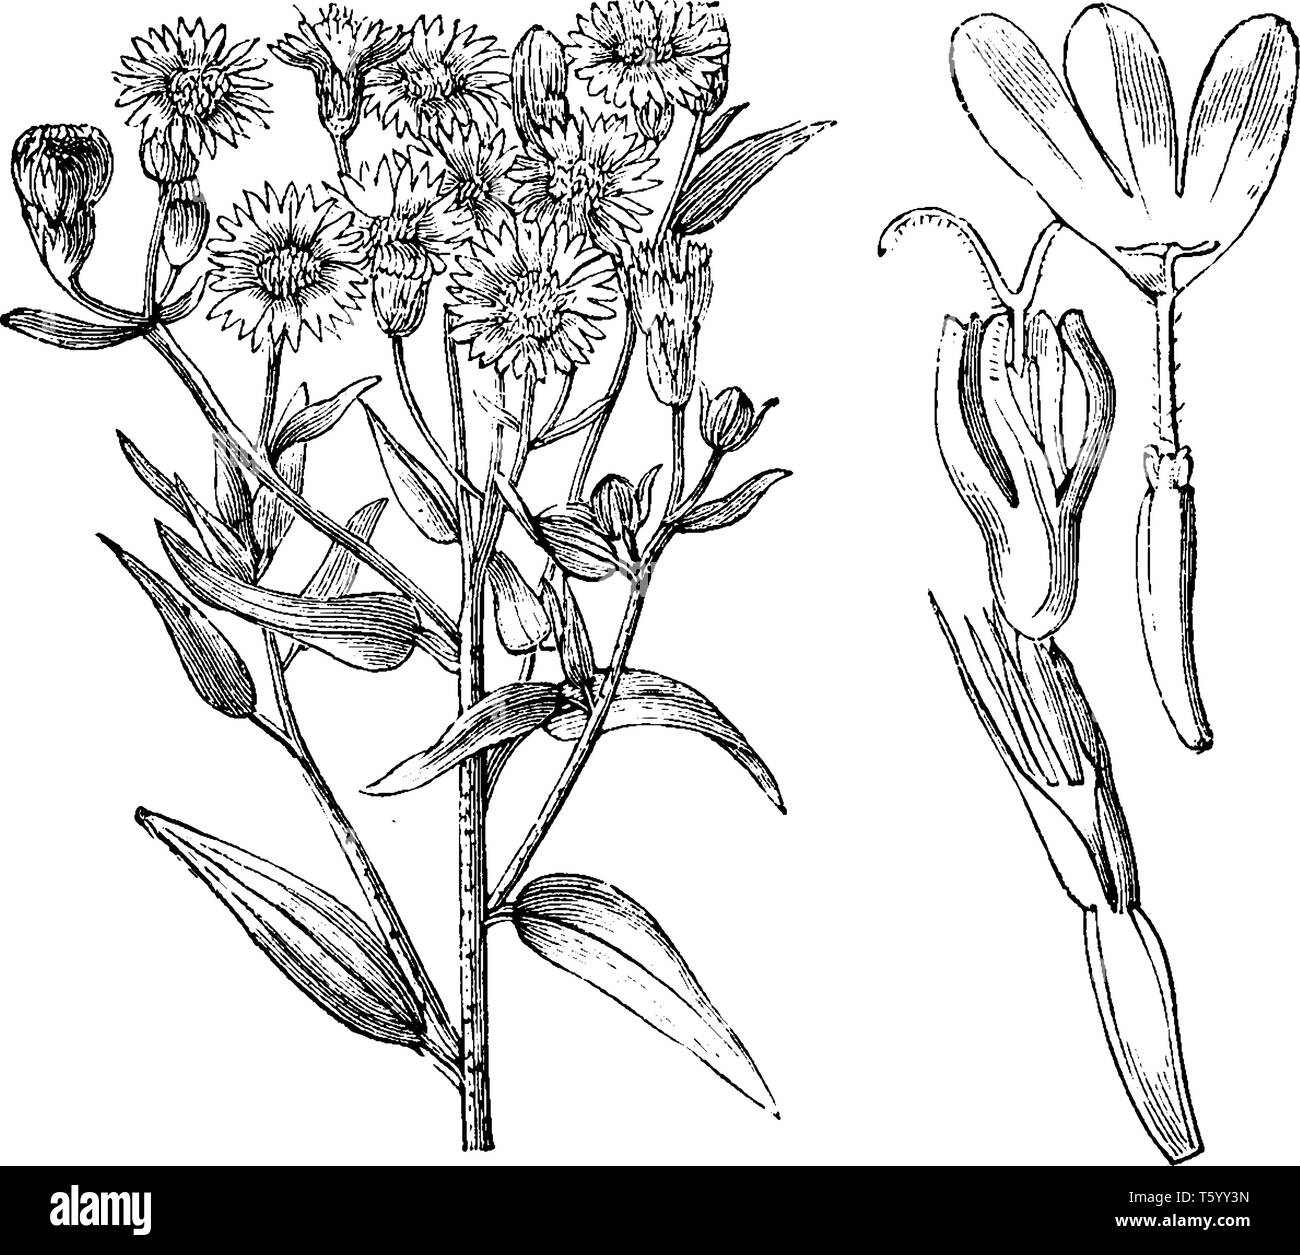 A picture, that's showing a Palafoxia Hookeriana. Stem is thin and long. The flowers are small and pink, vintage line drawing or engraving illustratio Stock Vector